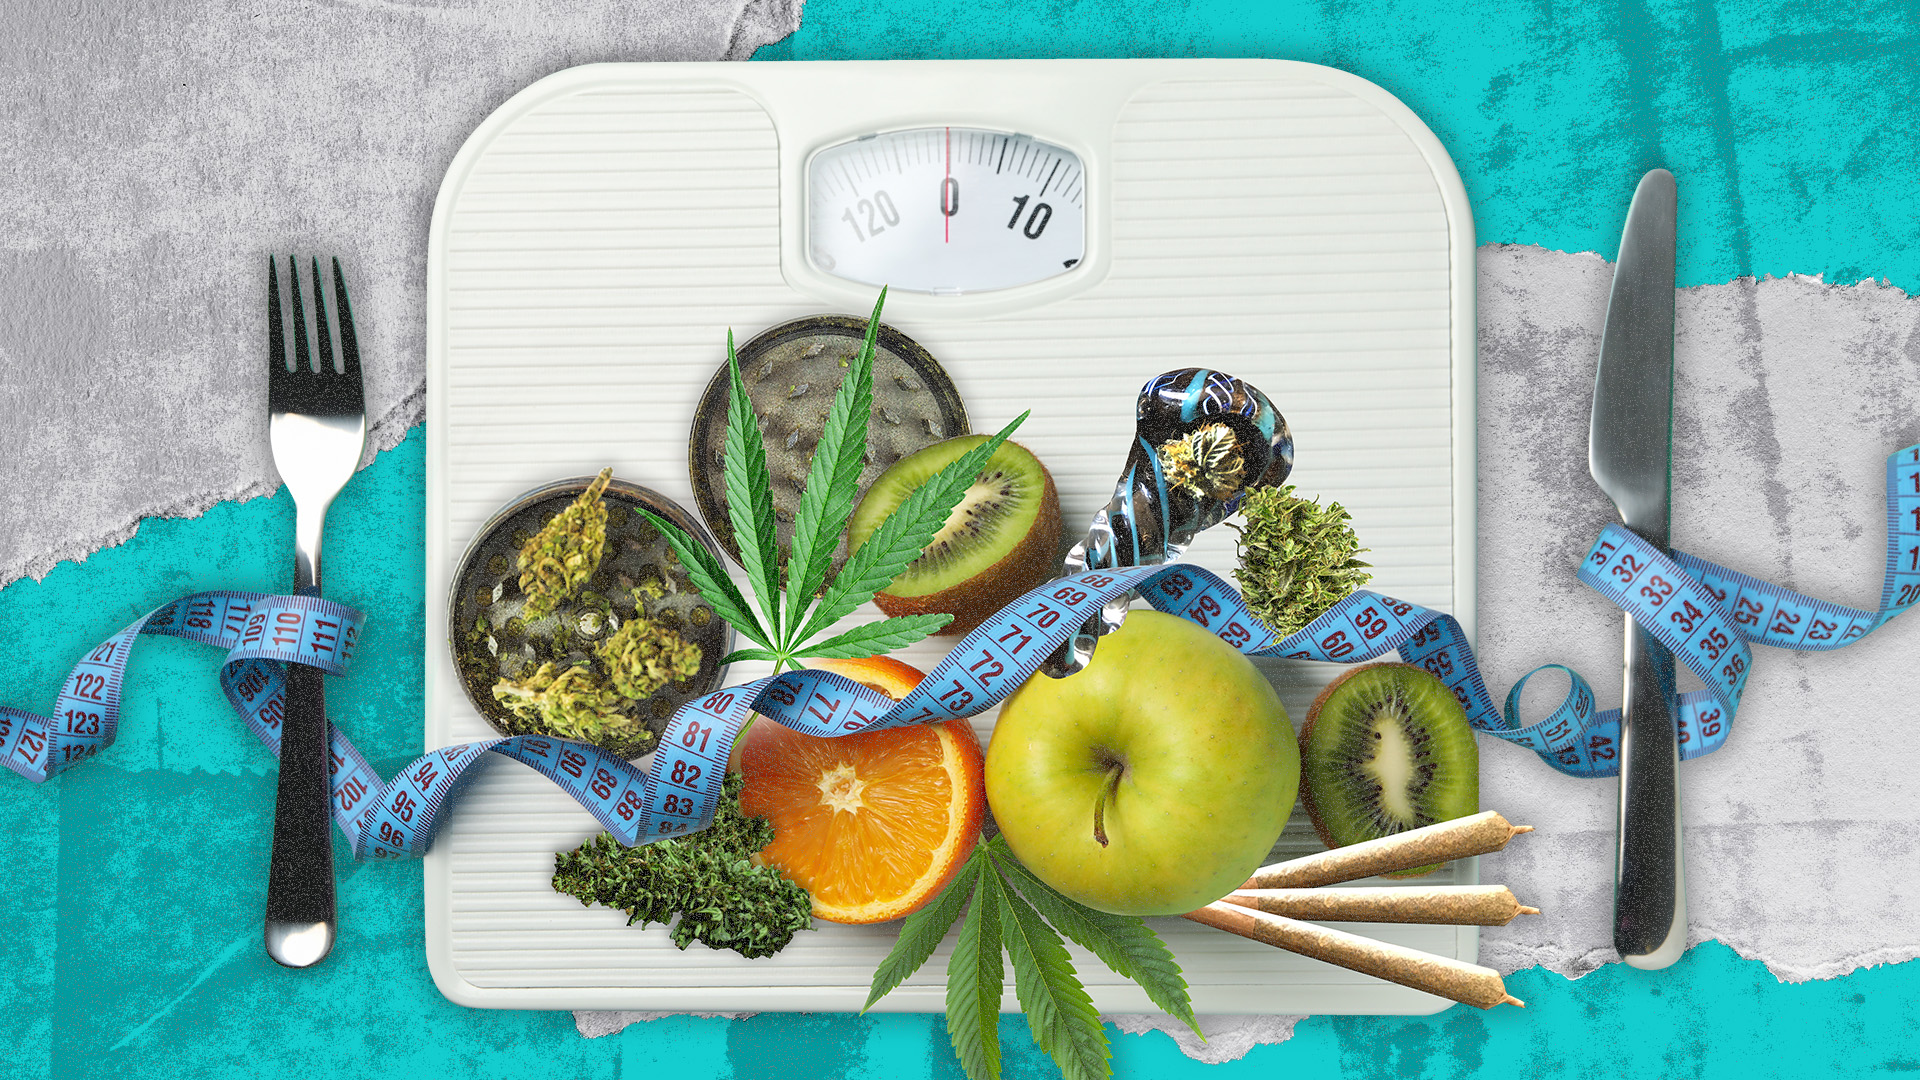 The Top 8 Cannabis Strains For Weight Loss